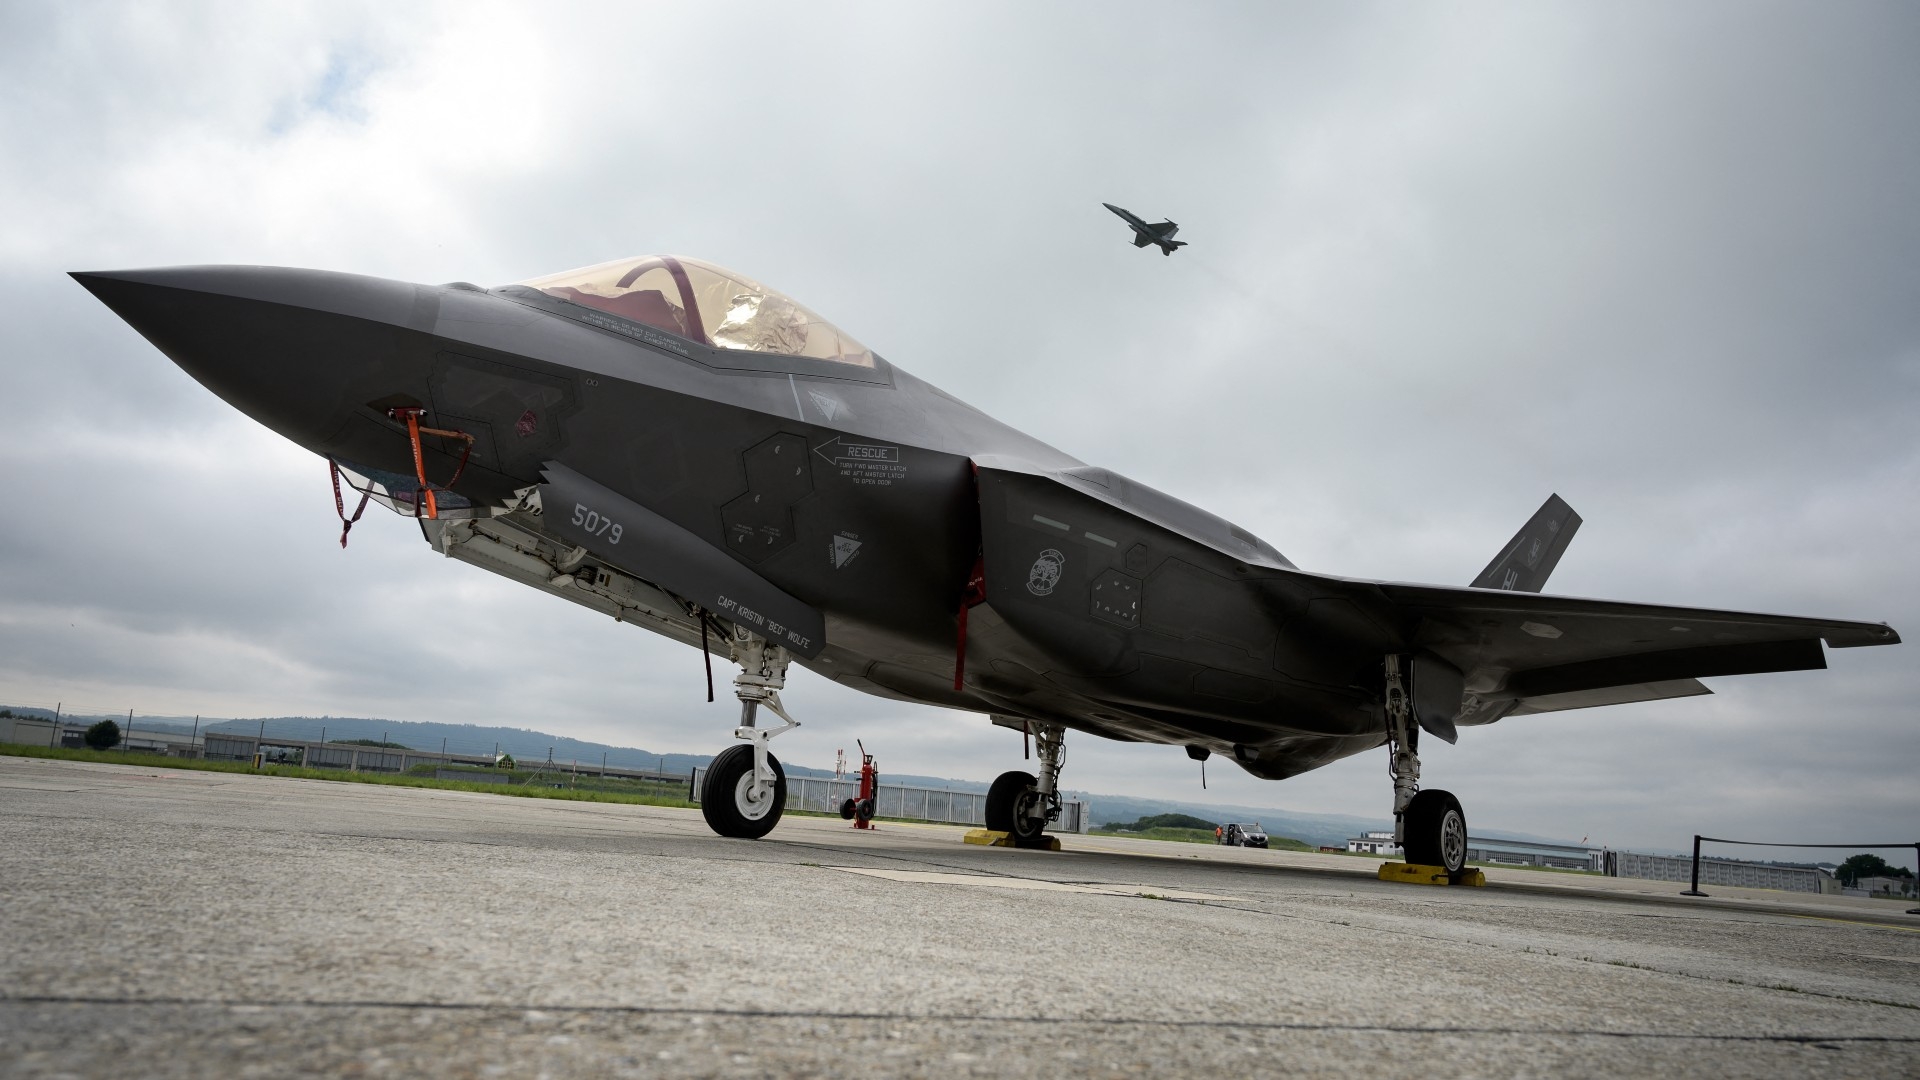 Turkey was removed from the fifth-generation F-35 fighter jet programme in 2019 due to concerns over possible Russian espionage through the S-400s.